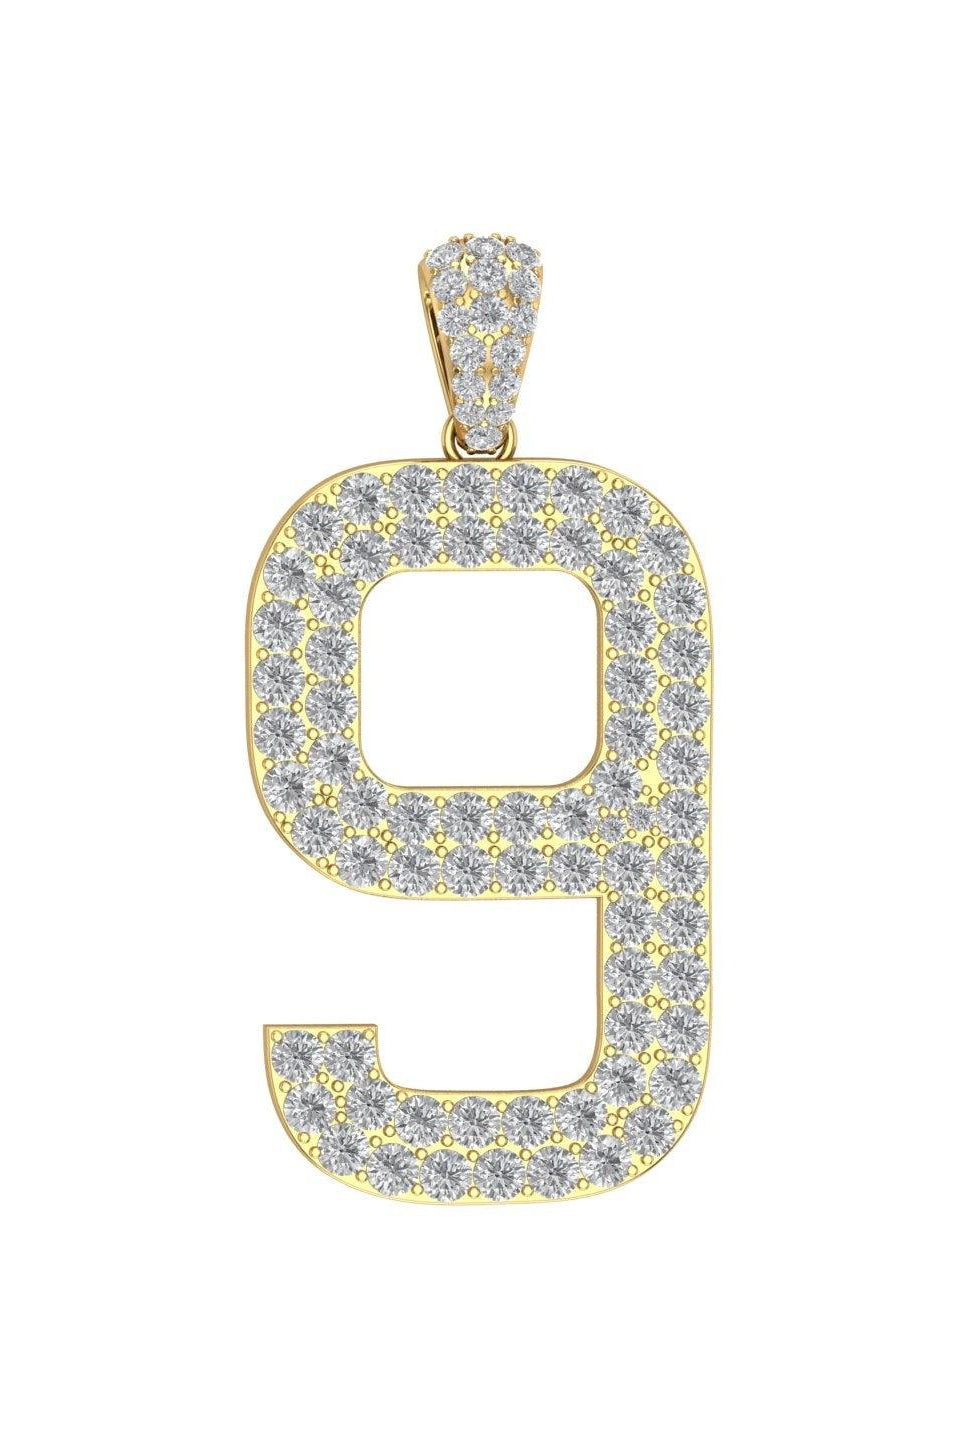 Gold Color Pendant in the Shape of 9 Made of 925 Sterling Silver Material with 20 Inch Long Silver Chain